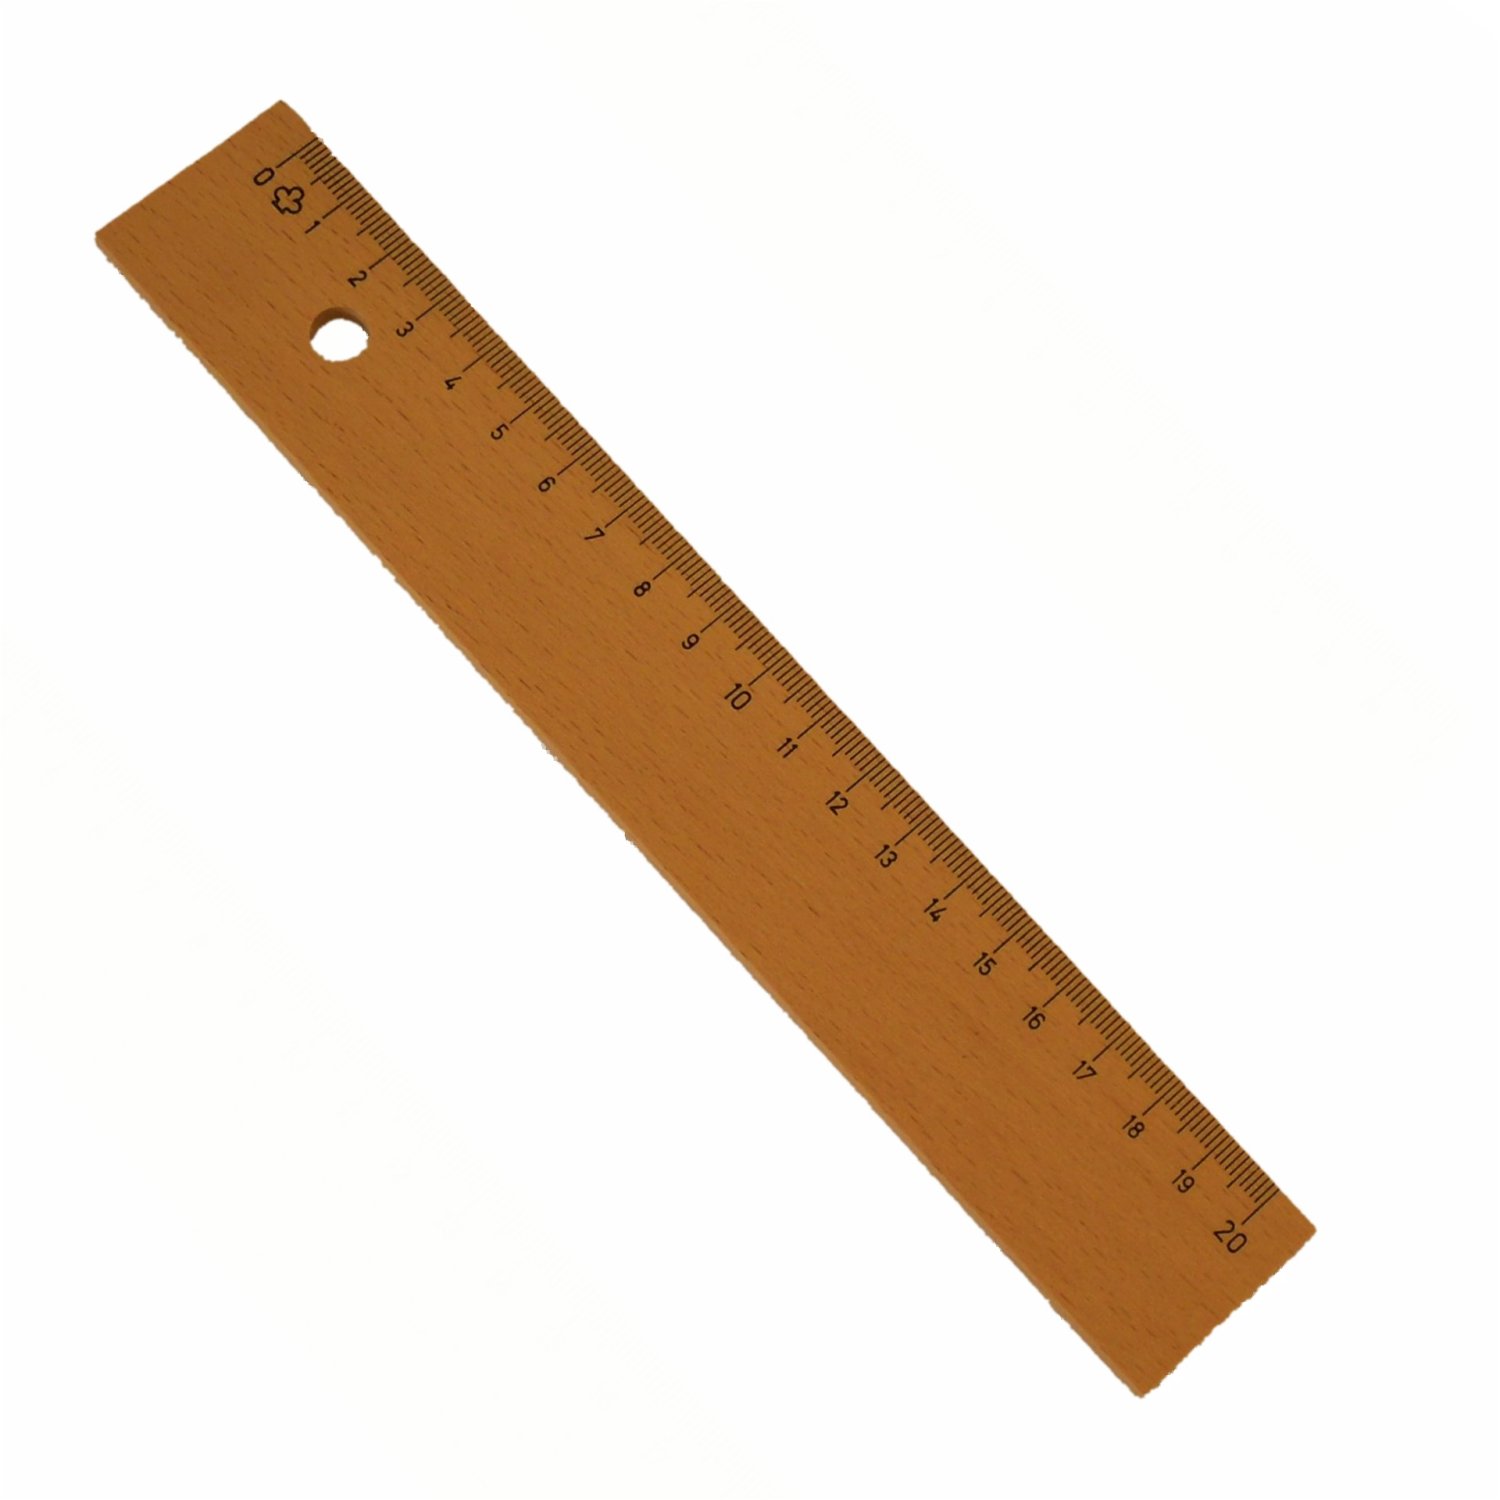 Sustainable wooden ruler made from local beech wood 20cm